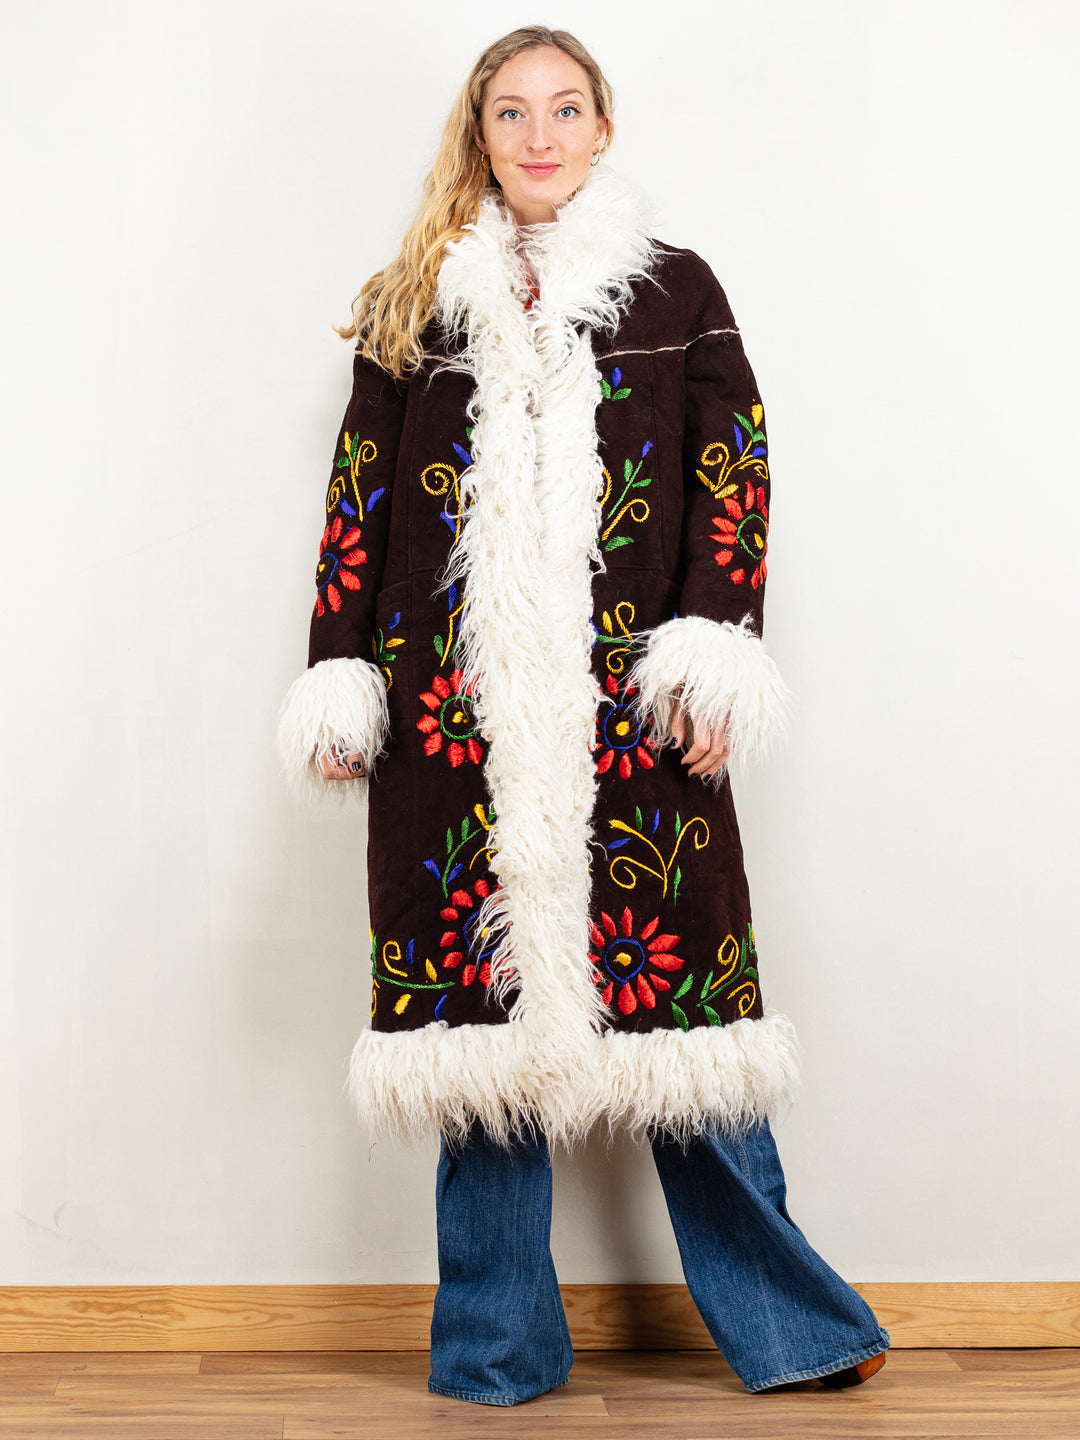 Vintage Style Afghan coat women sheepskin shearling penny lane almost famous boho hippie psychedelic swinging london embroidery size large